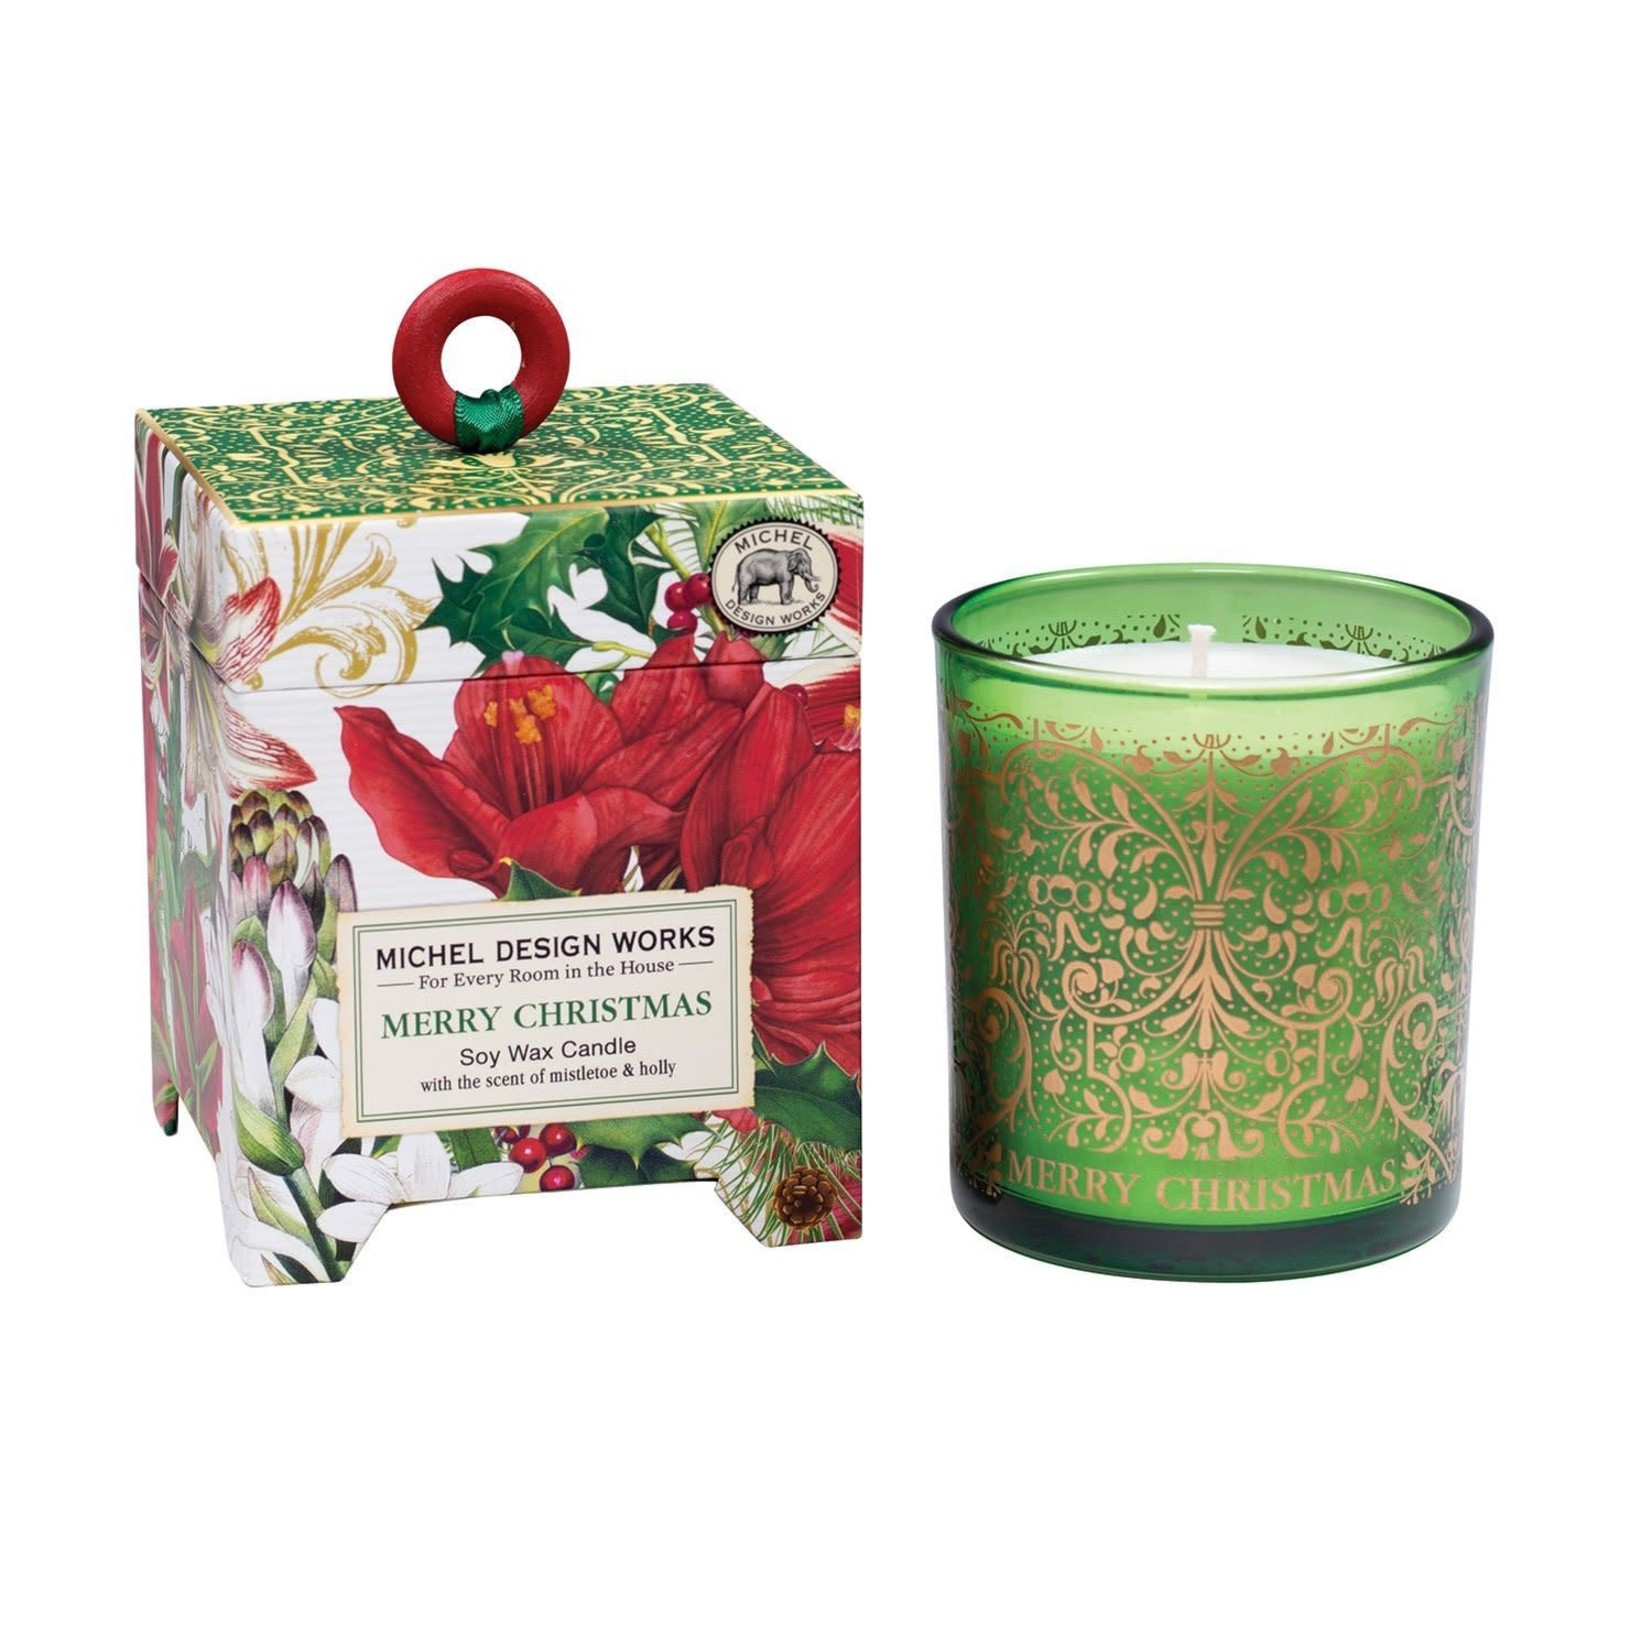 MICHELE DESIGN WORKS MERRY CHRISTMAS SOY WAX CANDLE